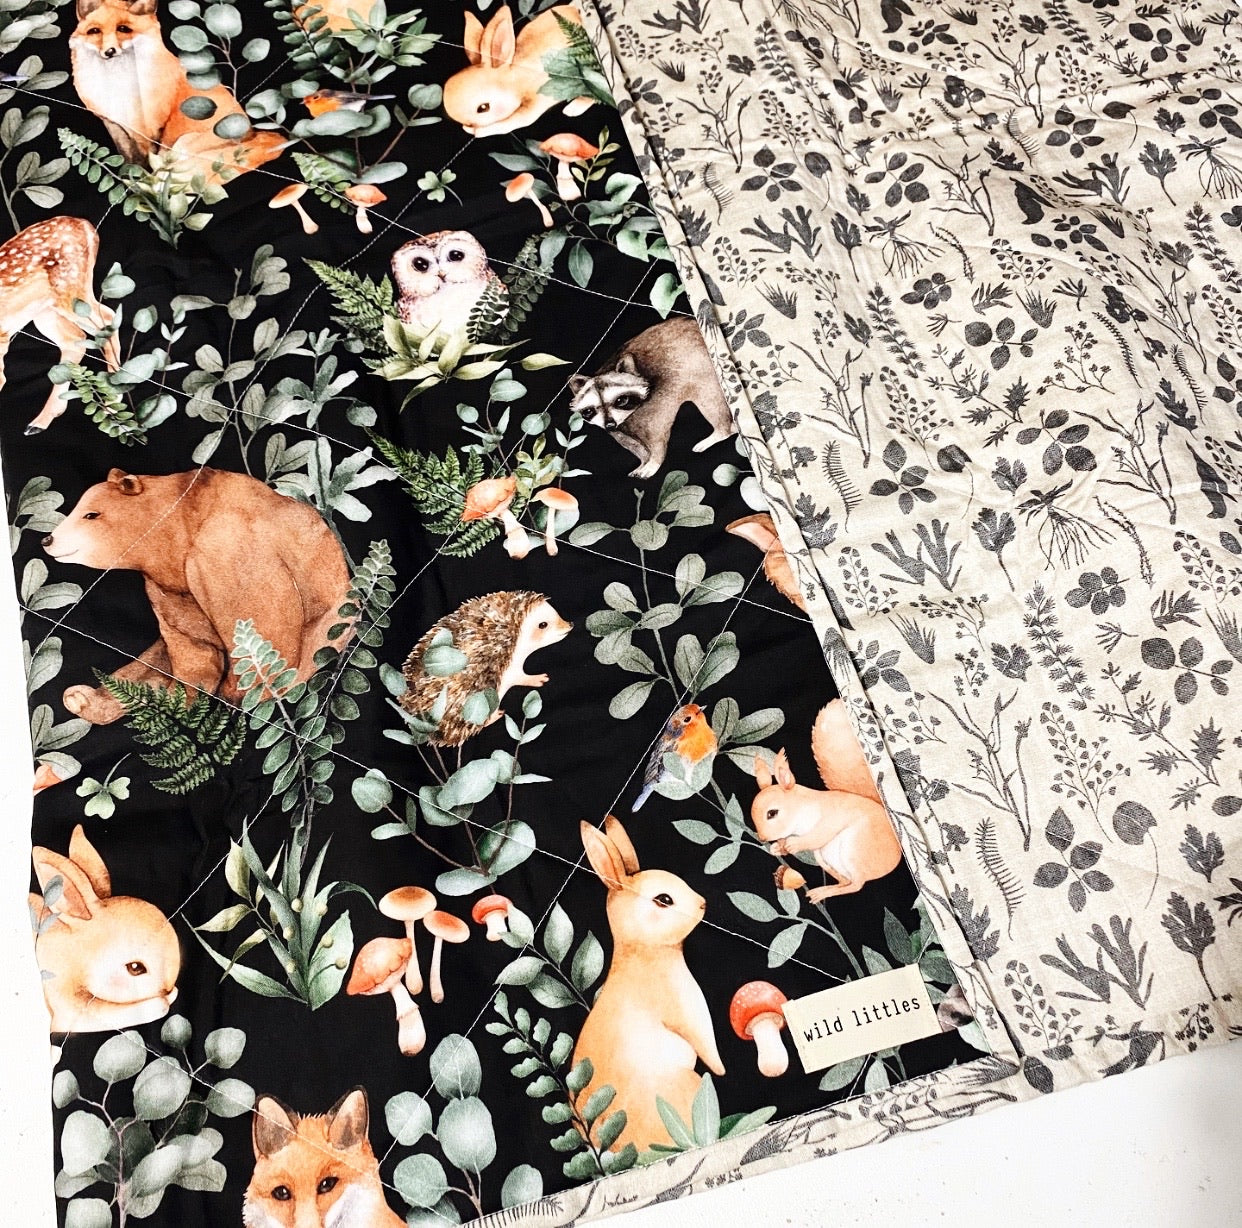 Forest Animals Wholecloth Quilt - Made to Order | Wild Littles